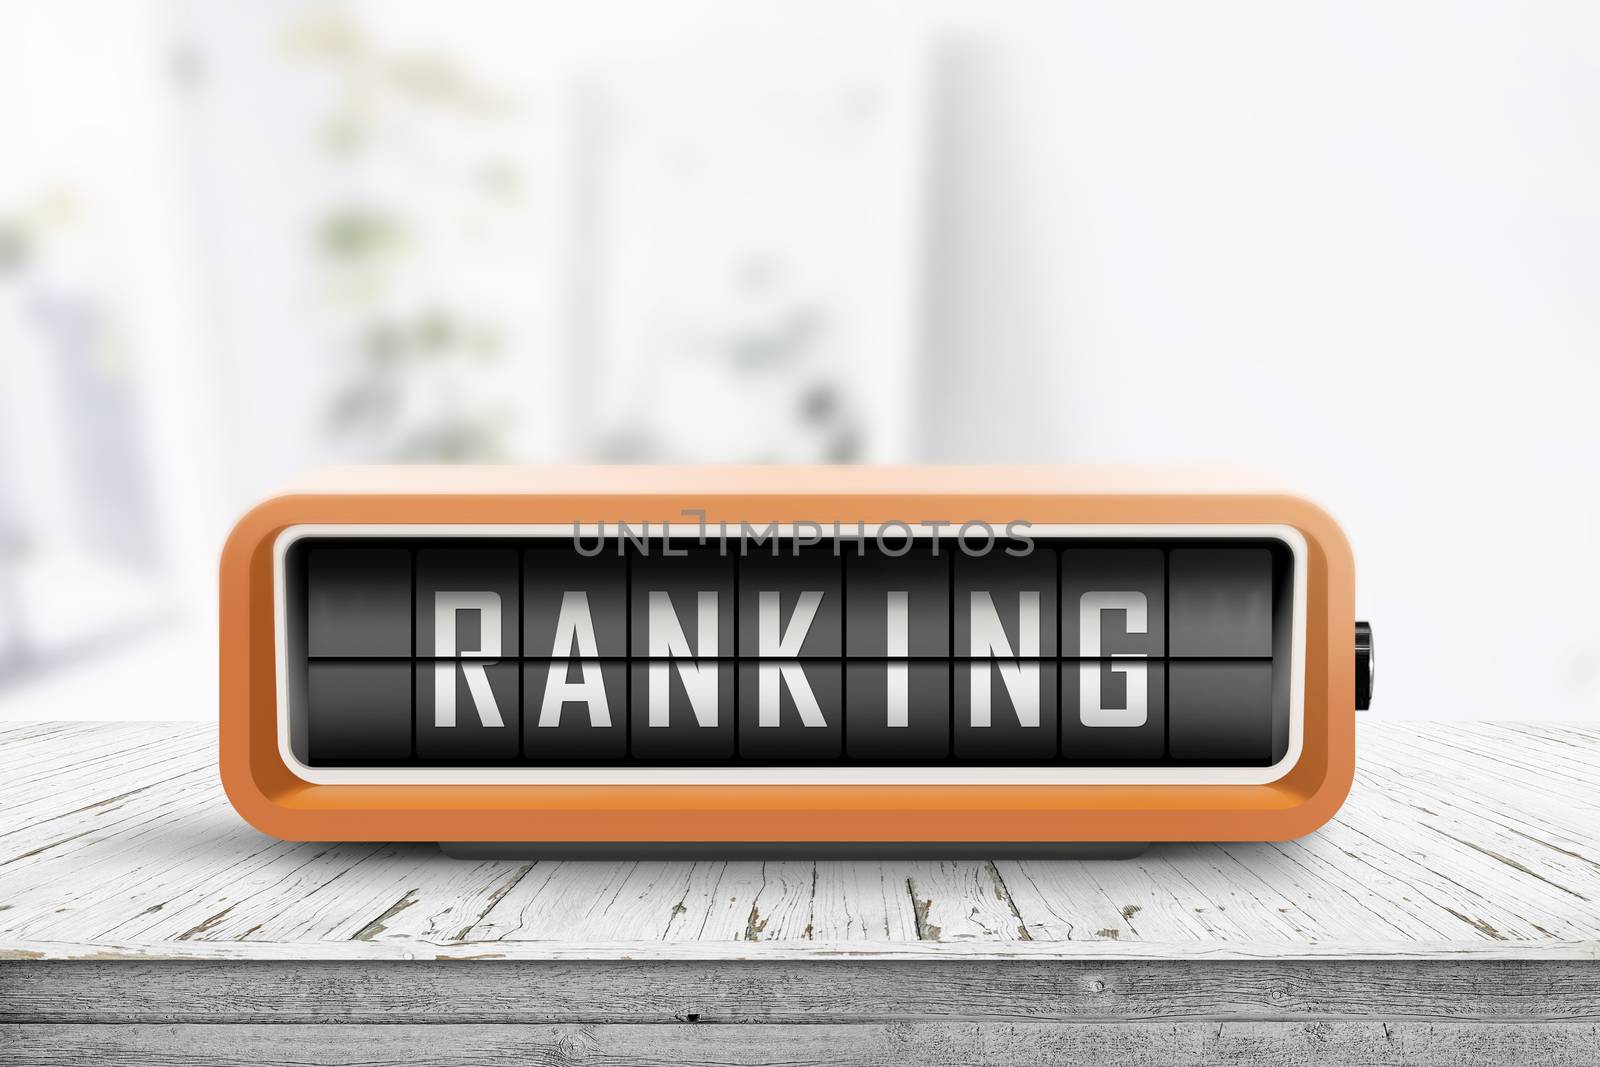 Ranking sign on a wooden table with planks by Sportactive